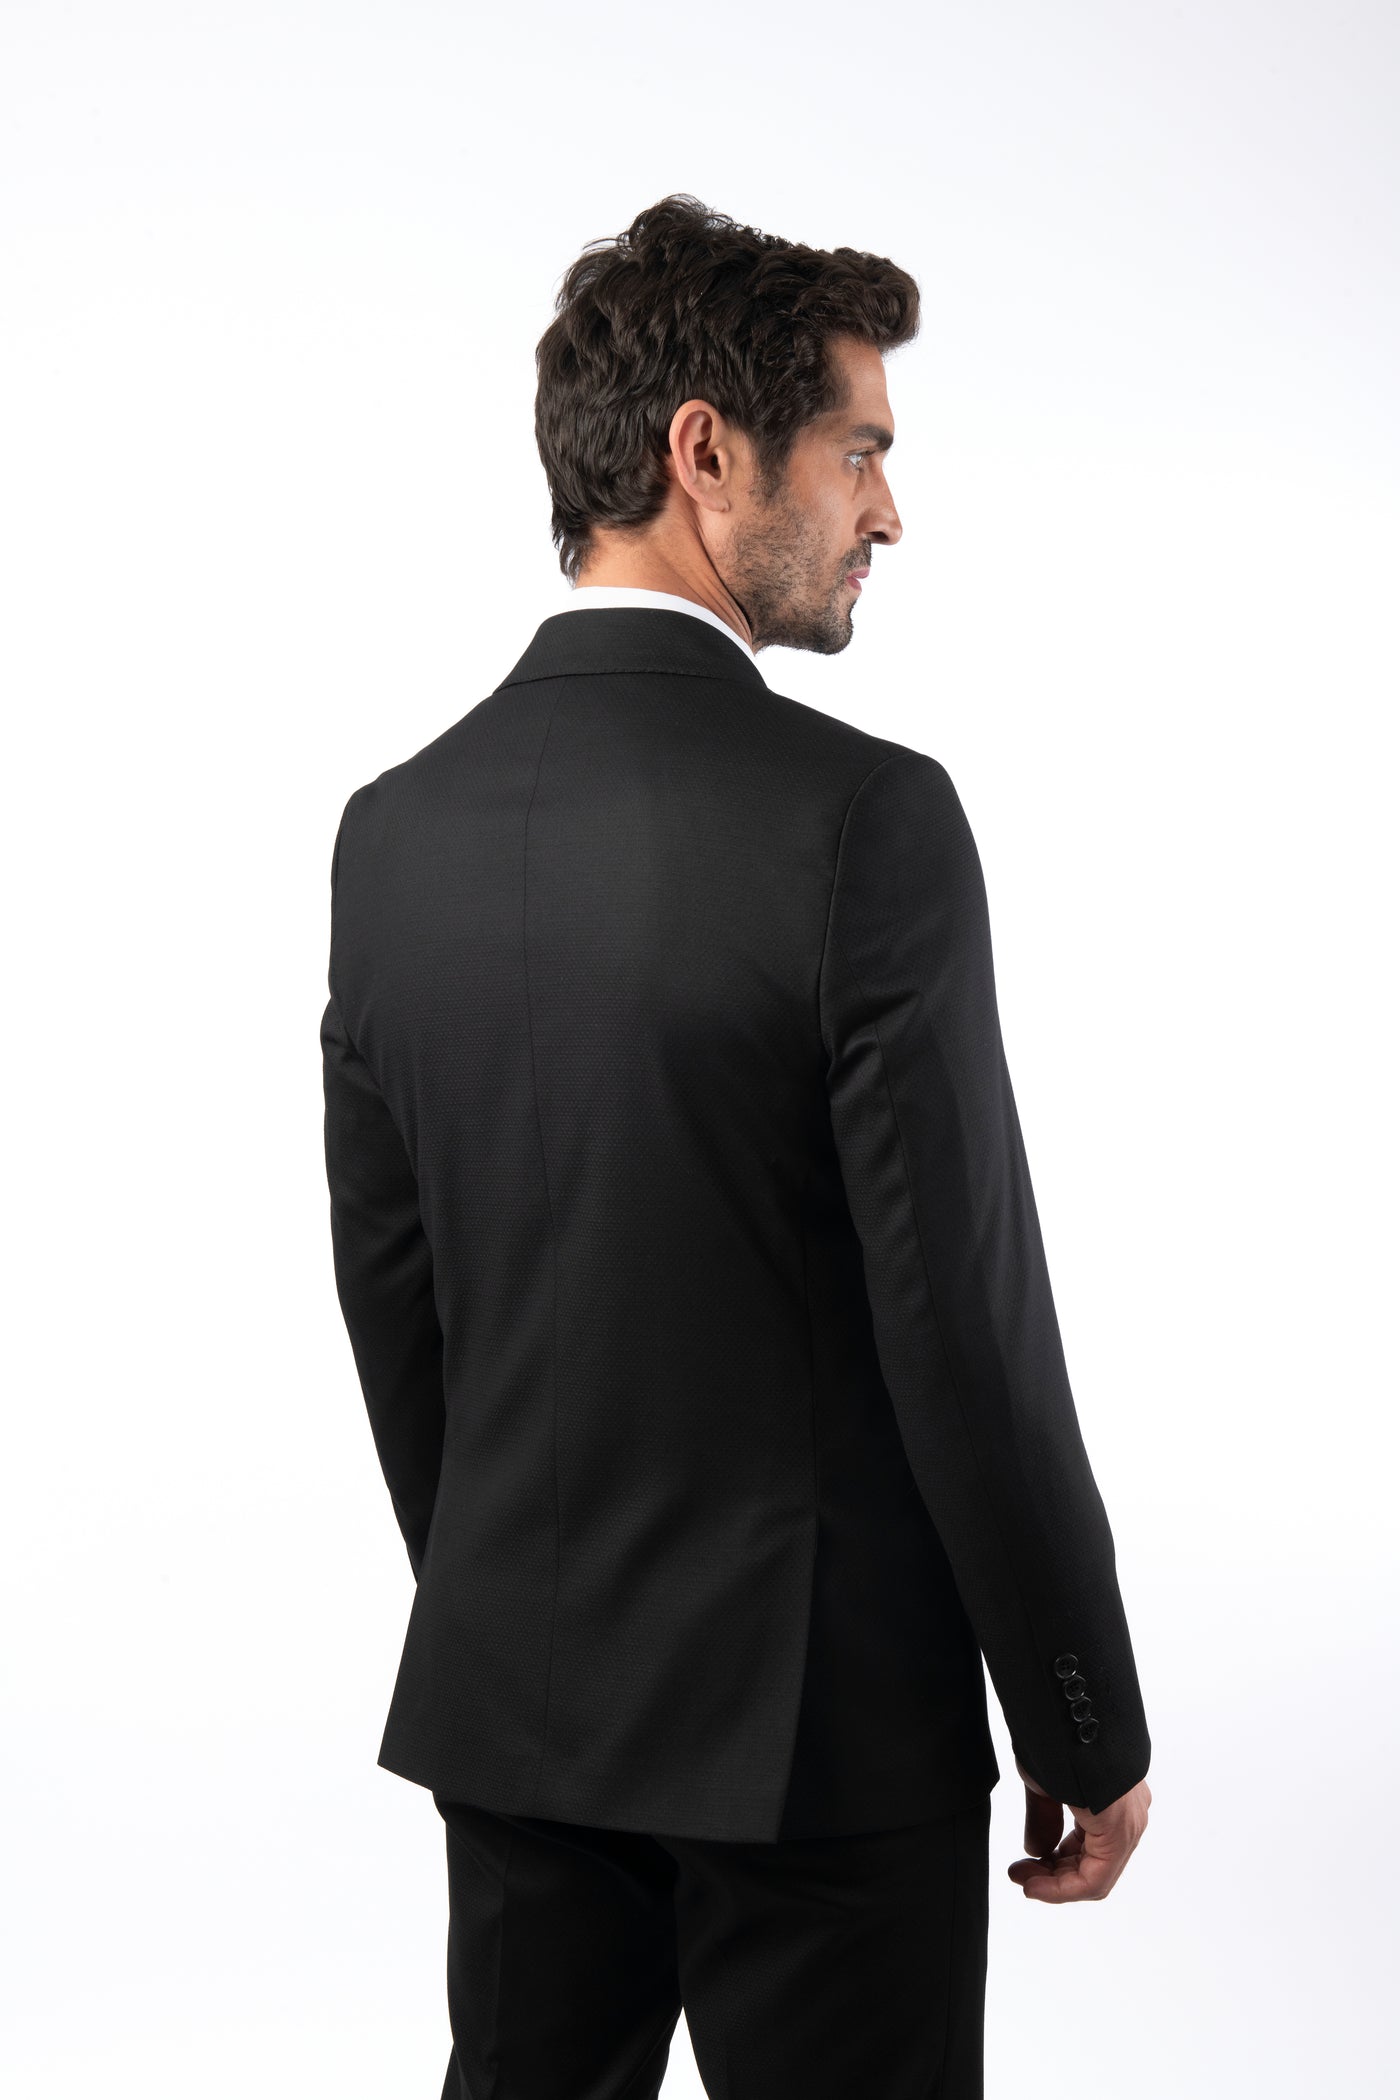 Jacquard Single Breasted Double Vent Black Formal Suite